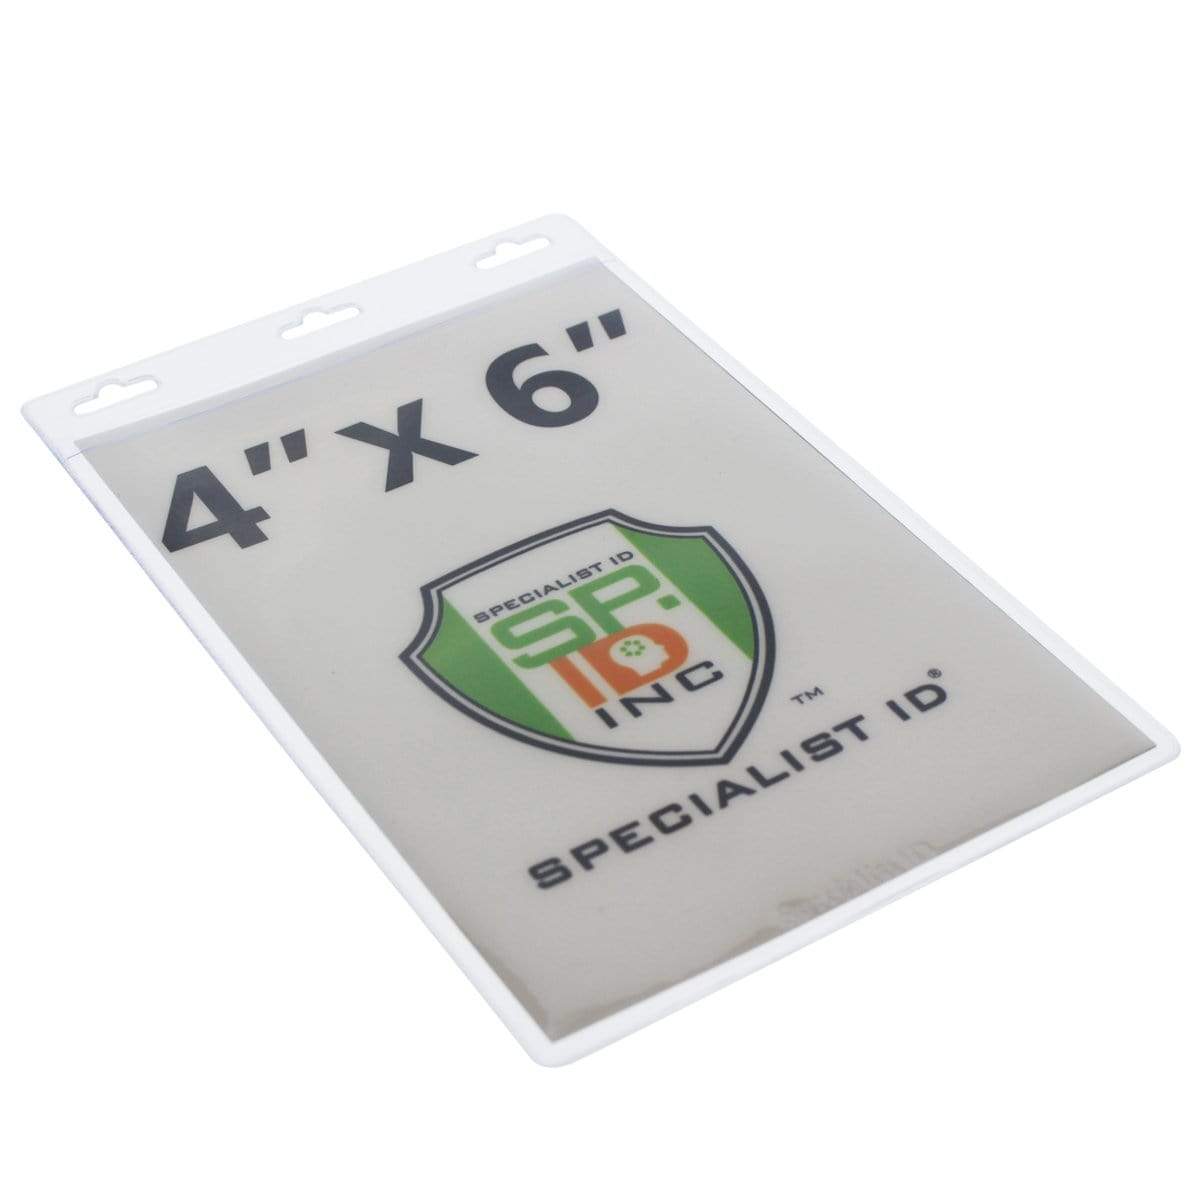 Plastic badge holder measuring 4 inches by 6 inches with an ID security shield logo labeled "Specialist ID INC." This Vertical Oversized 4X6 Vinyl ID Badge Holder (XL46V) is perfect for larger IDs and special size credential holders.